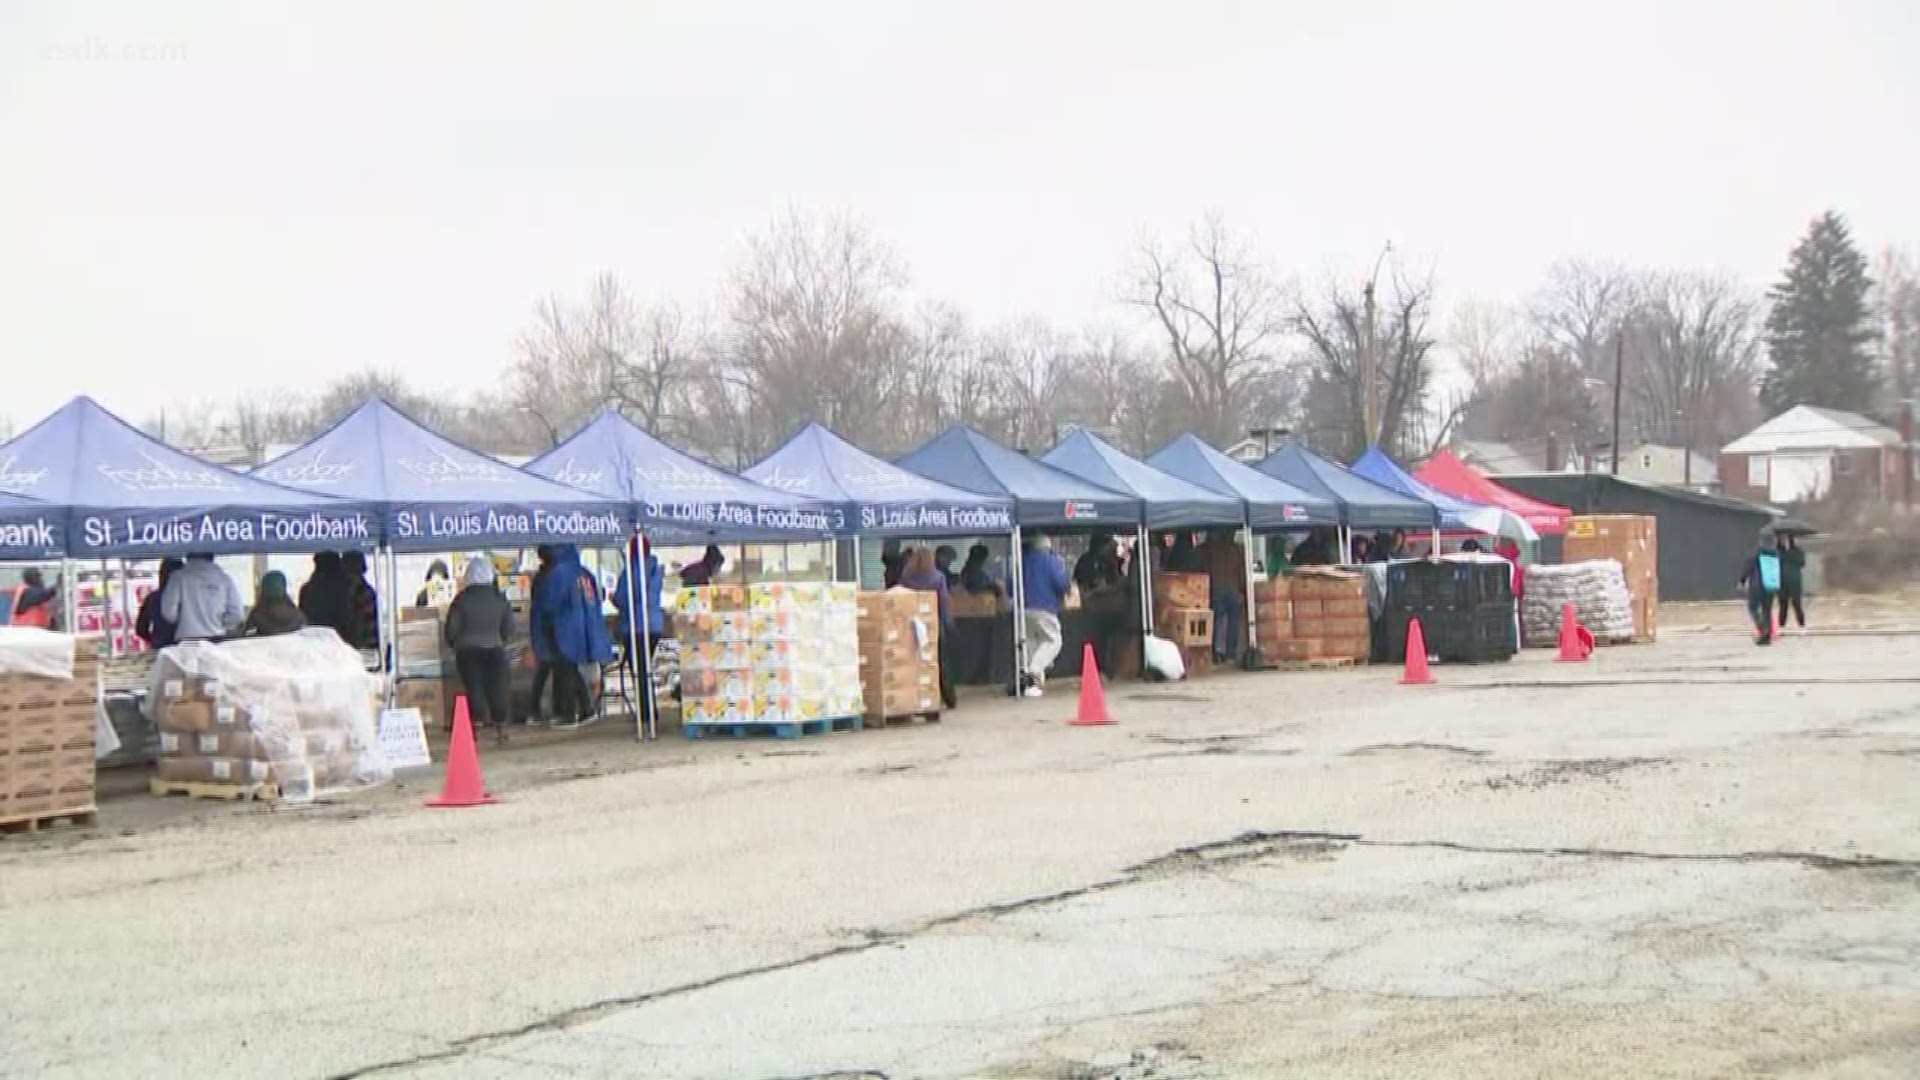 St. Louis Area Food Bank and Operation Food Search put on similar food fairs regularly